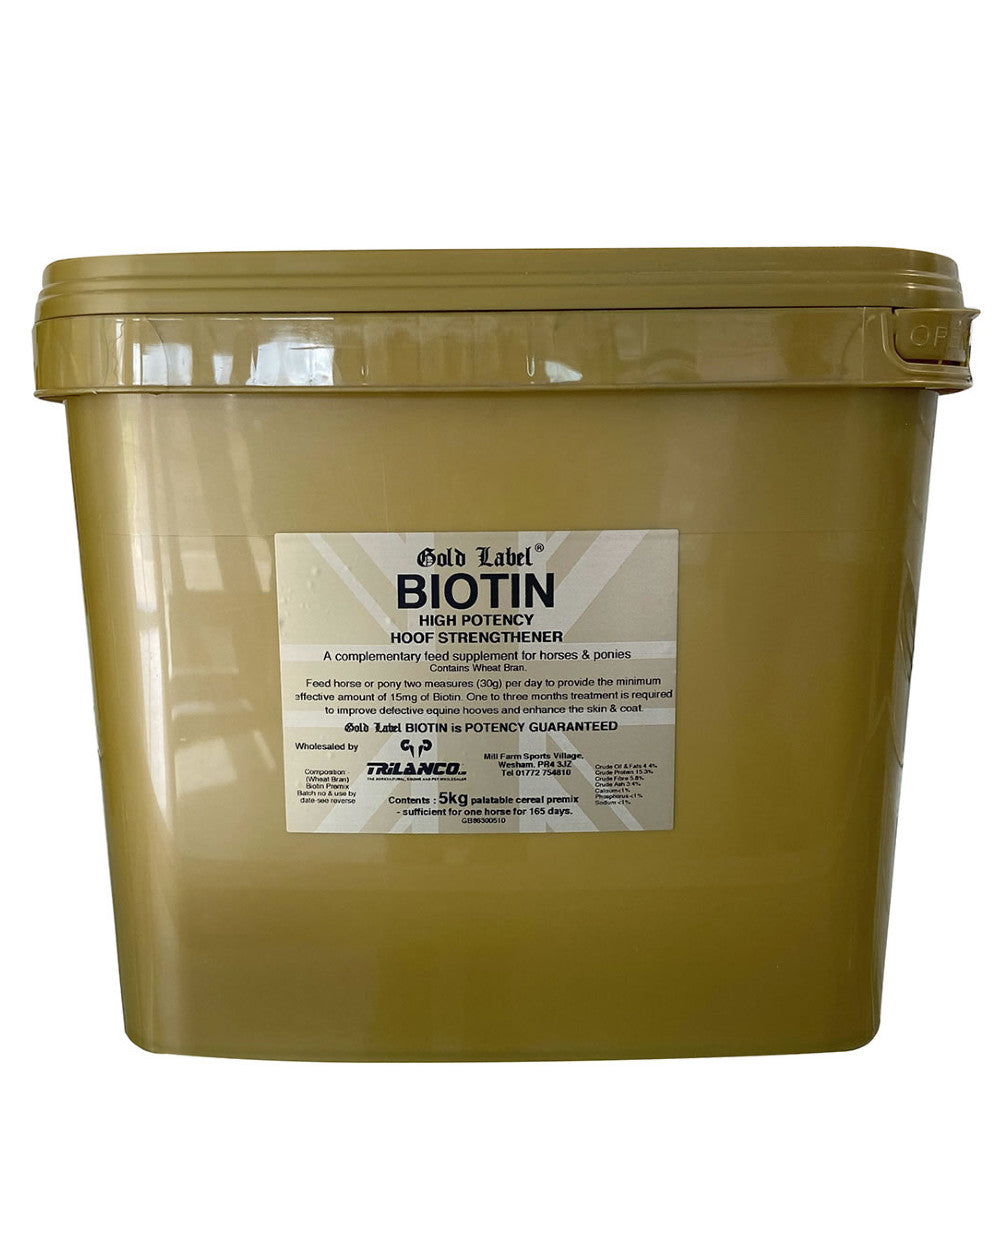 Gold Label Biotin On A White Background